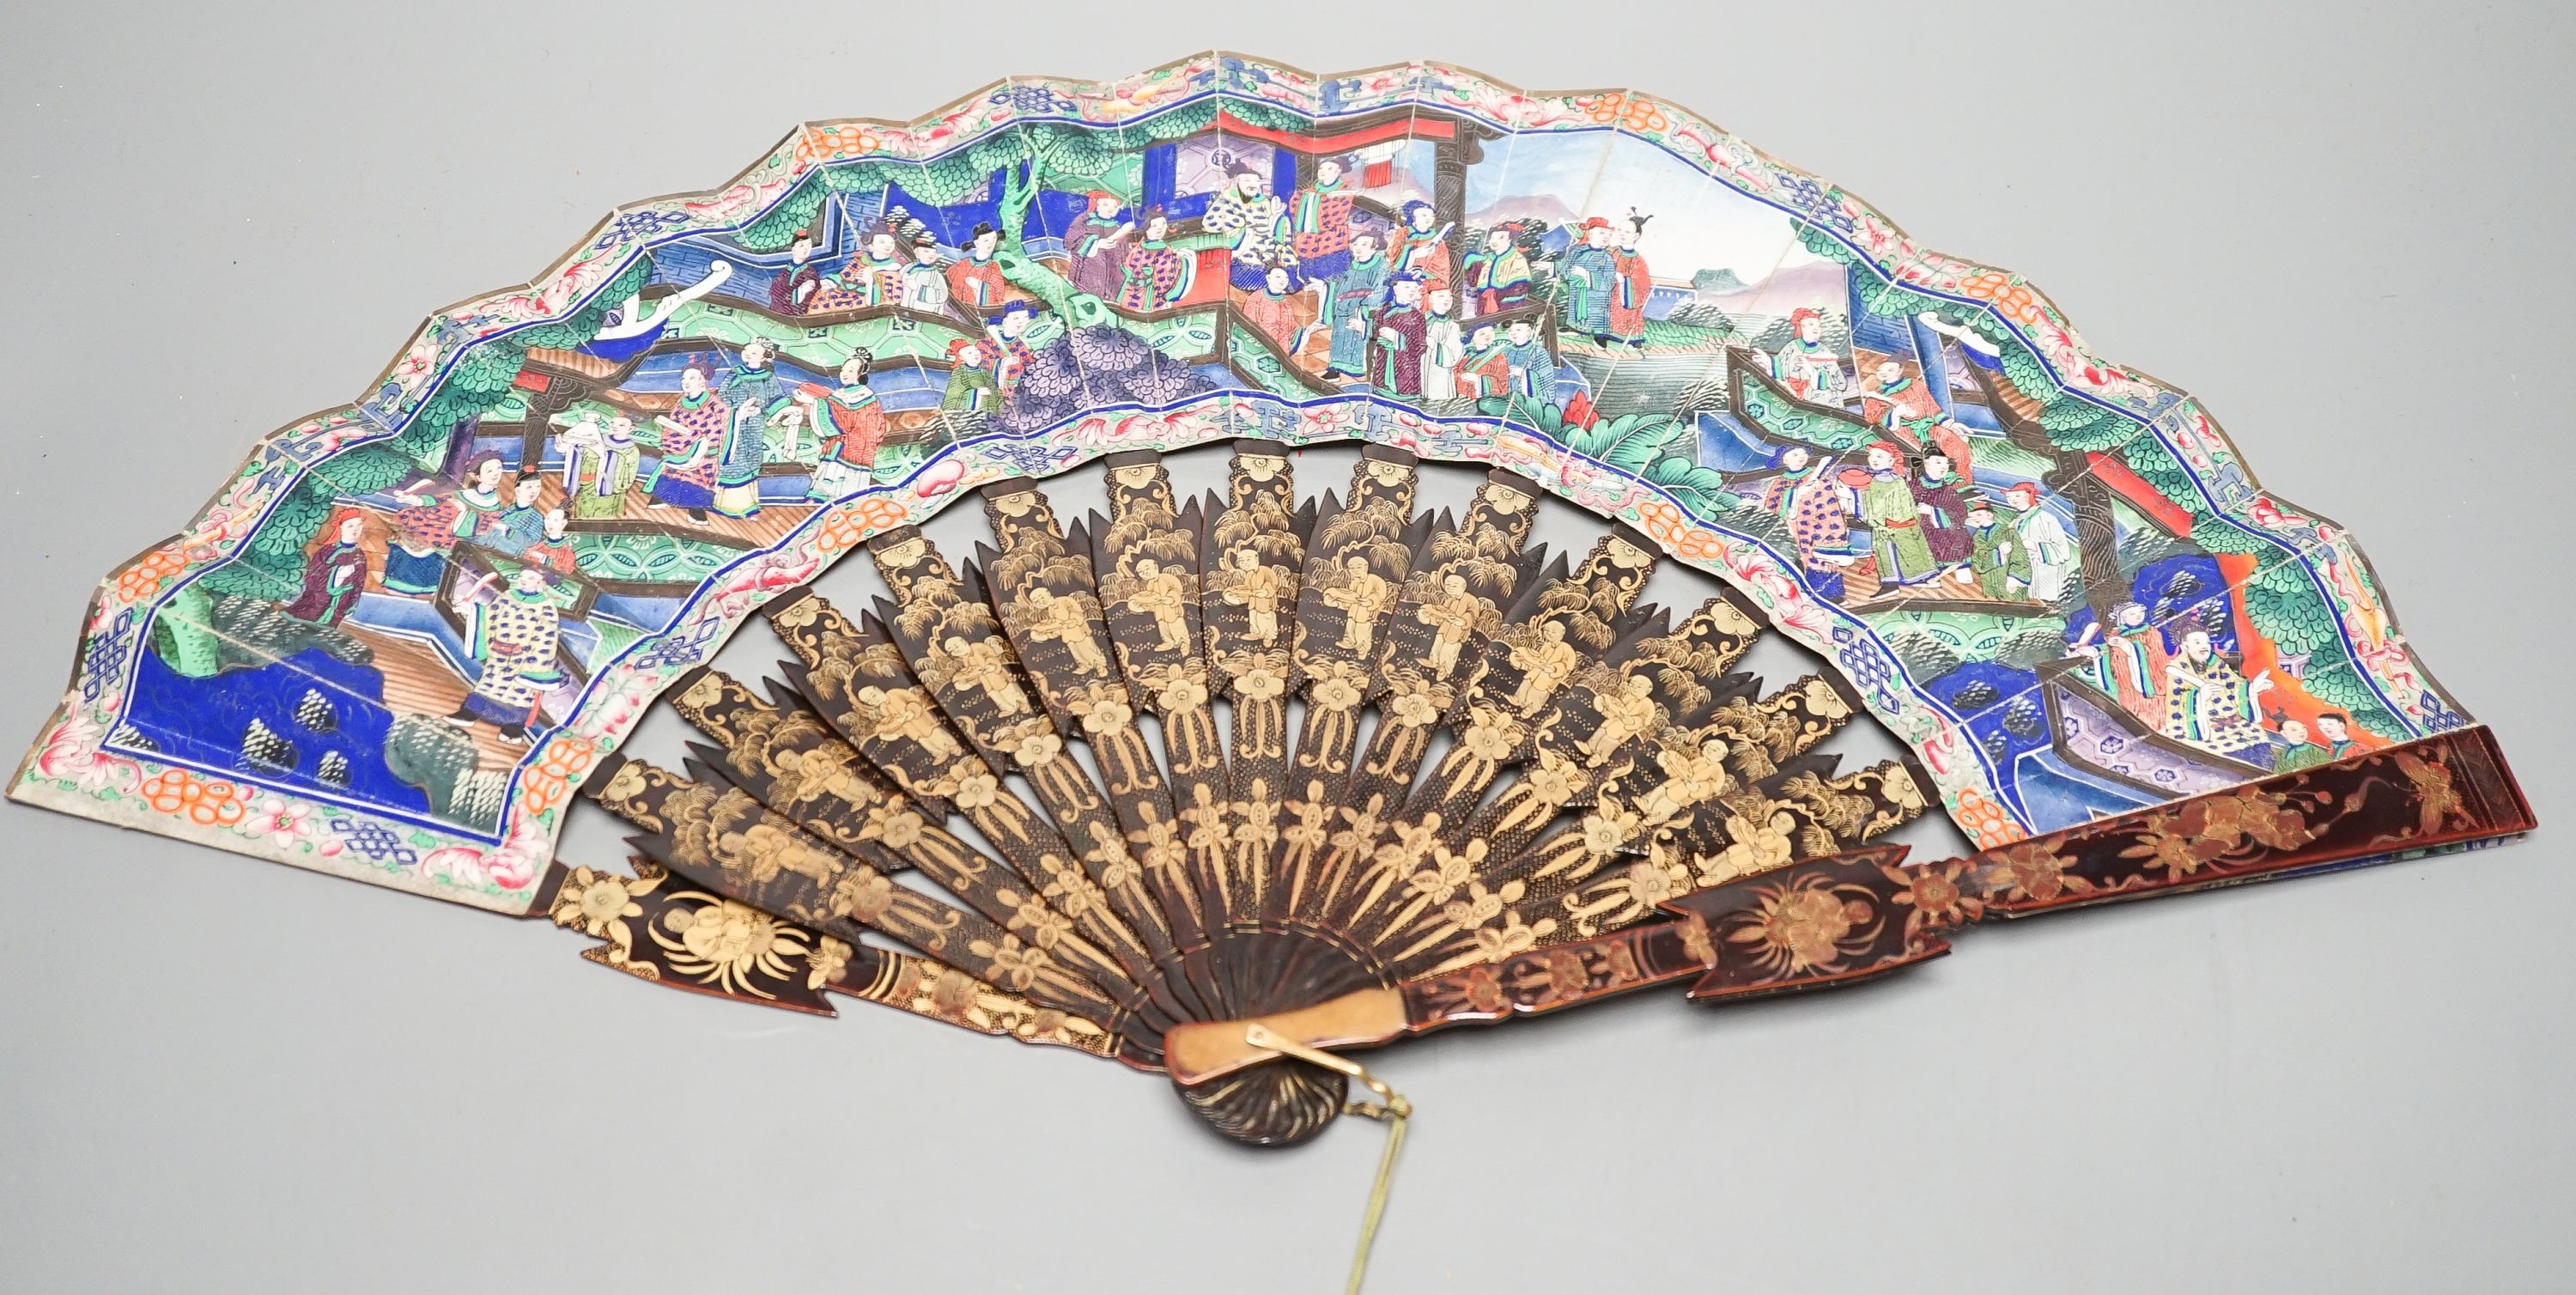 A Chinese export gilt decorated lacquer fan and box, mid 19th century, the appliqué work paper fan leaf decorated with figures amid pavilions and trees, box 32cm